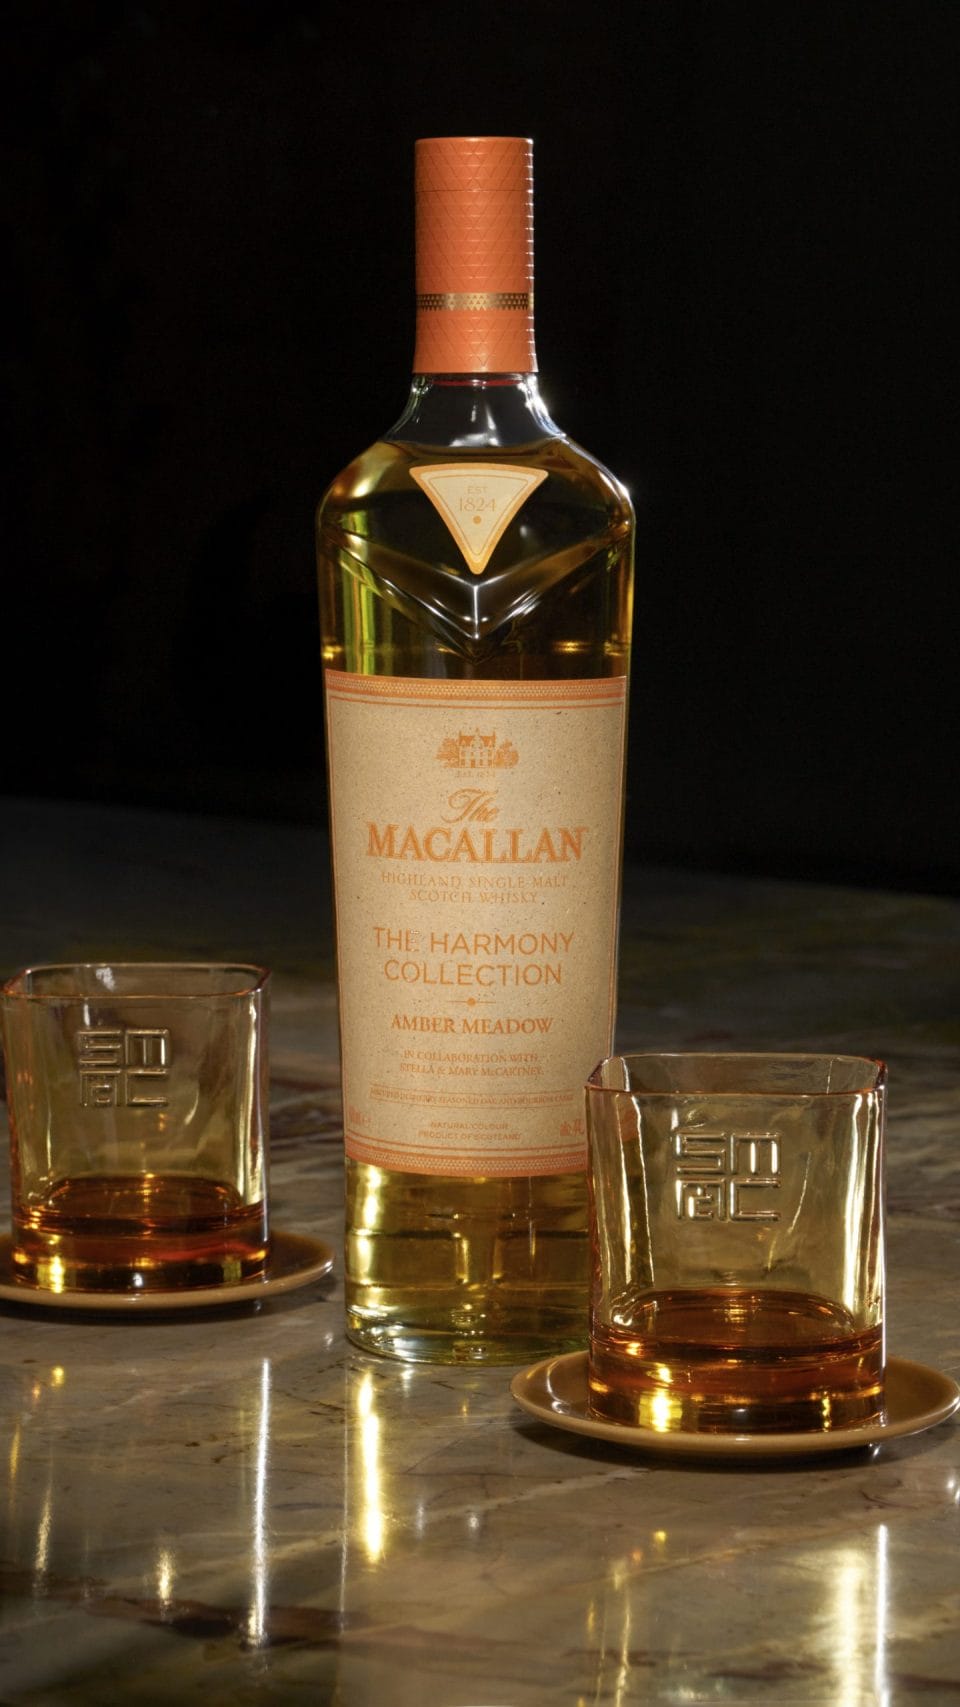 The Macallan Harmony III Collection Is an Ode to the Scottish Lands